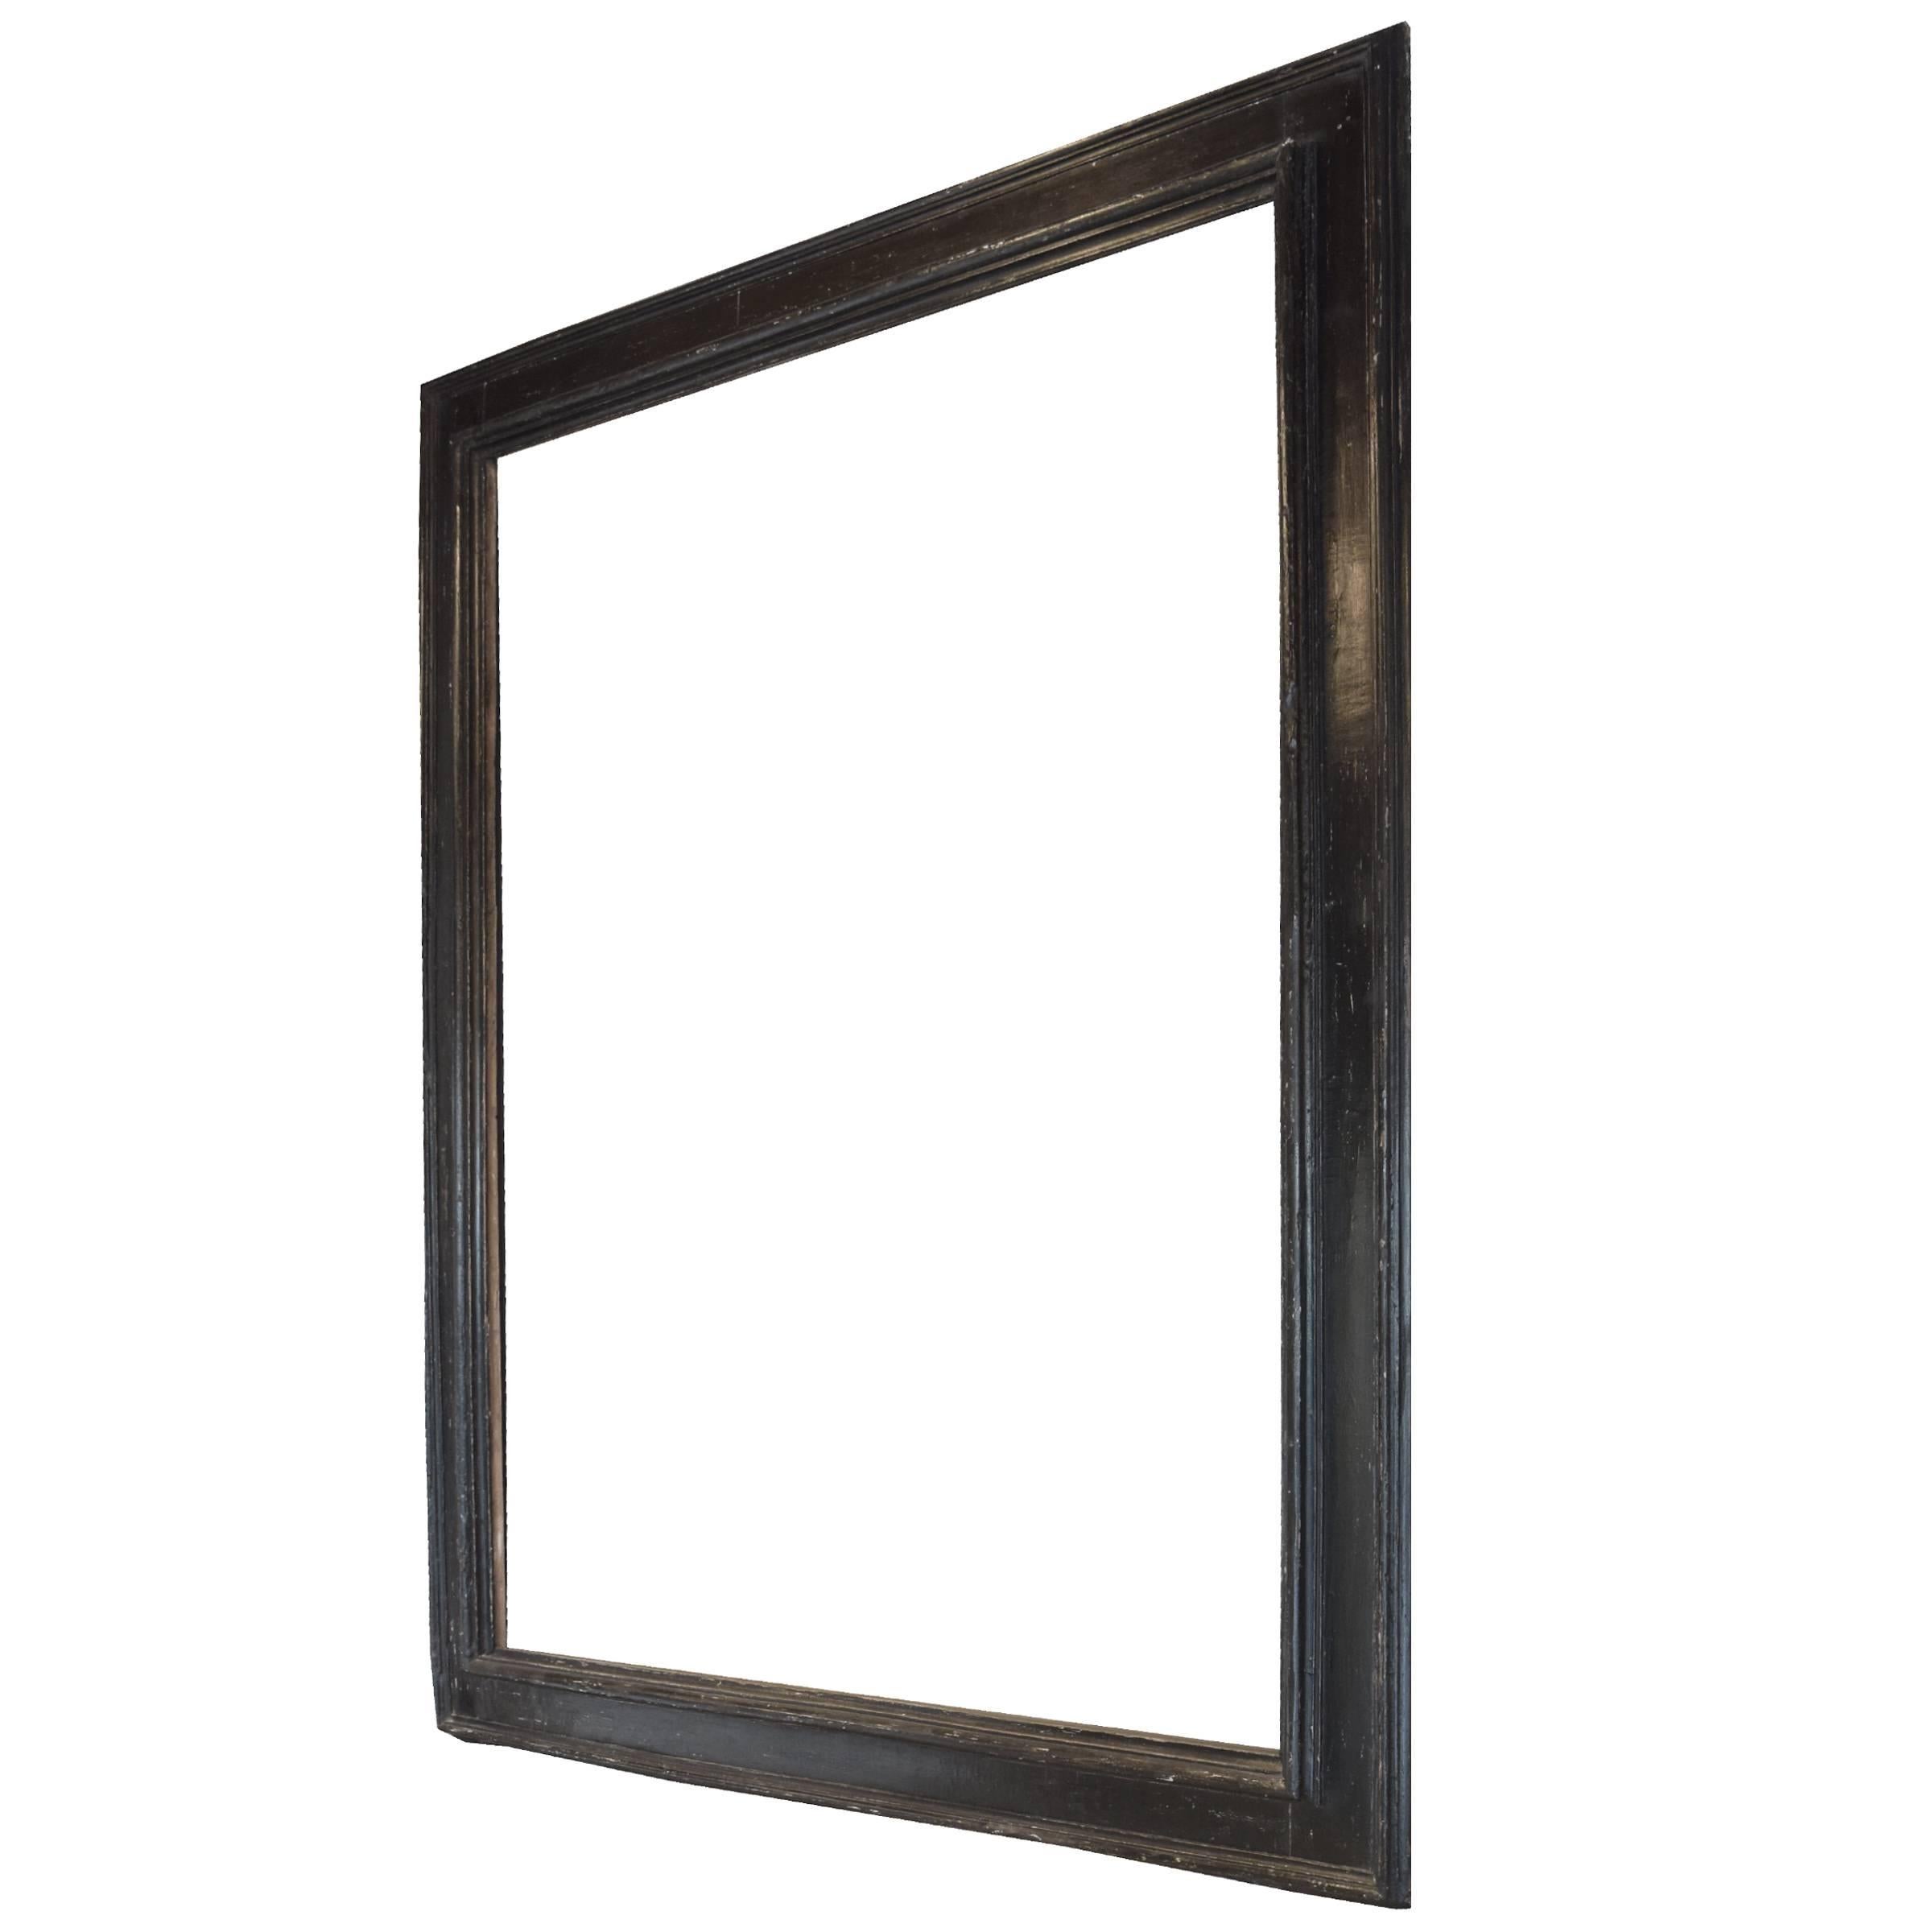 A monumental 18th century northern Italian ebonized frame of wonderful proportion, with original wrought iron hangers.